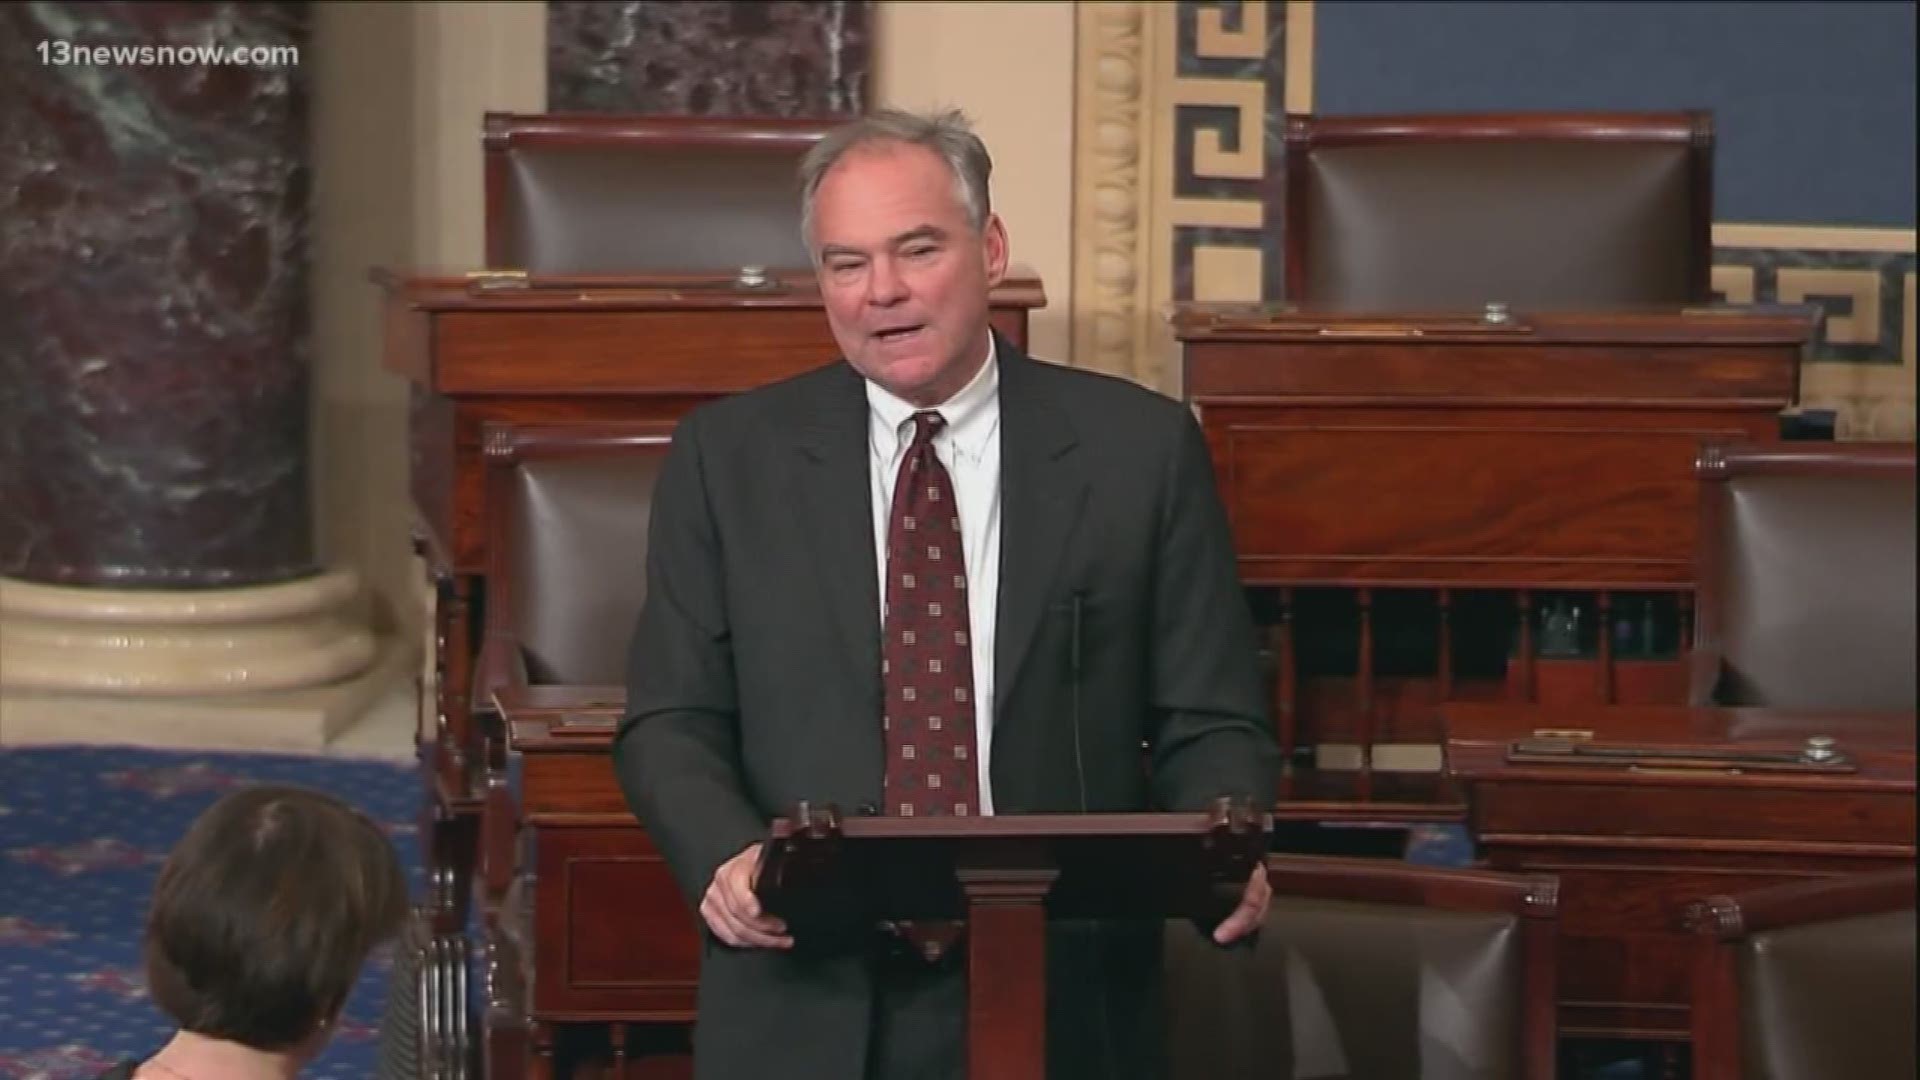 "I do not believe the United States should be in another war in the Middle East right now," Sen. Kaine said. He doesn't believe we should fight to protect Saudi oil.